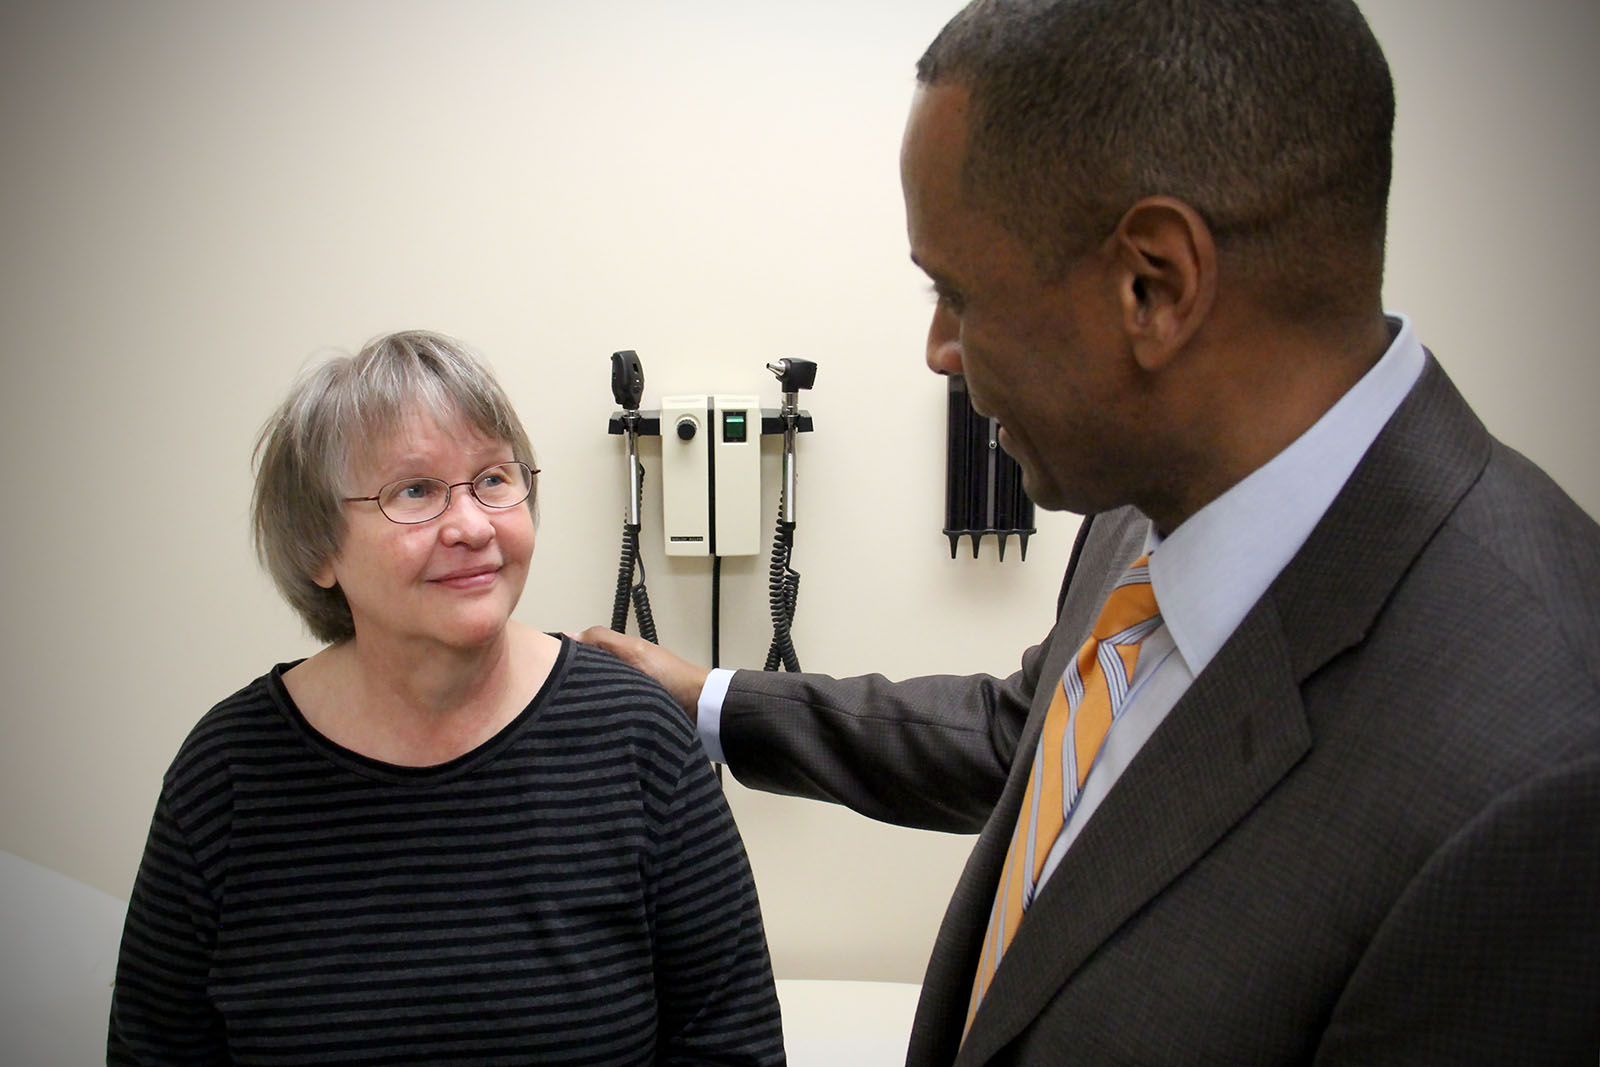 A patient speaks with a doctor about lung screening